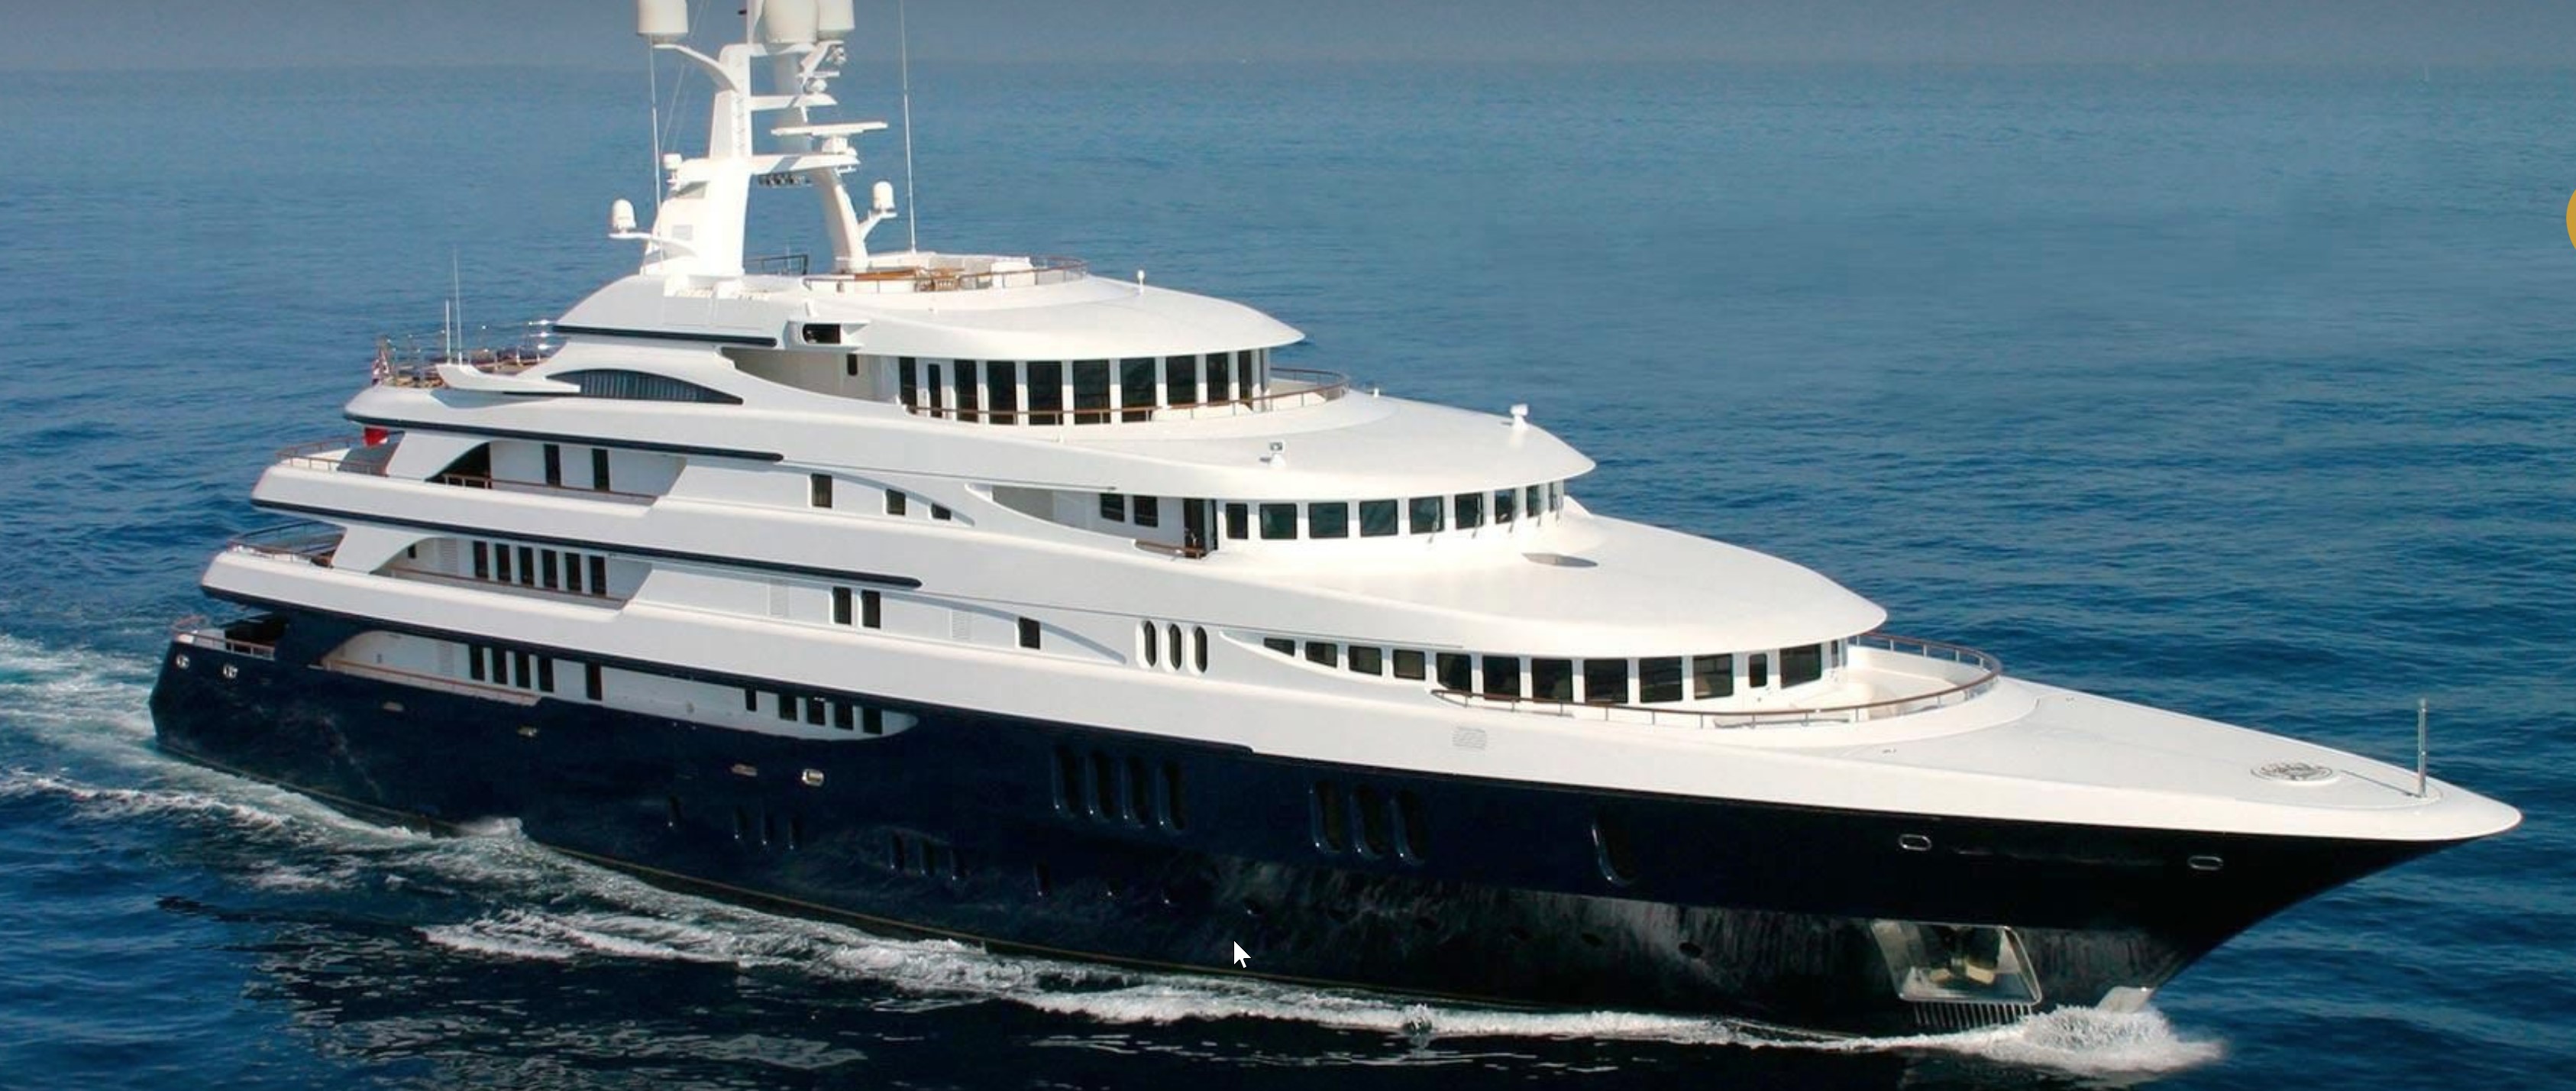 Superyachts Can Now Be Registered in the U.S.